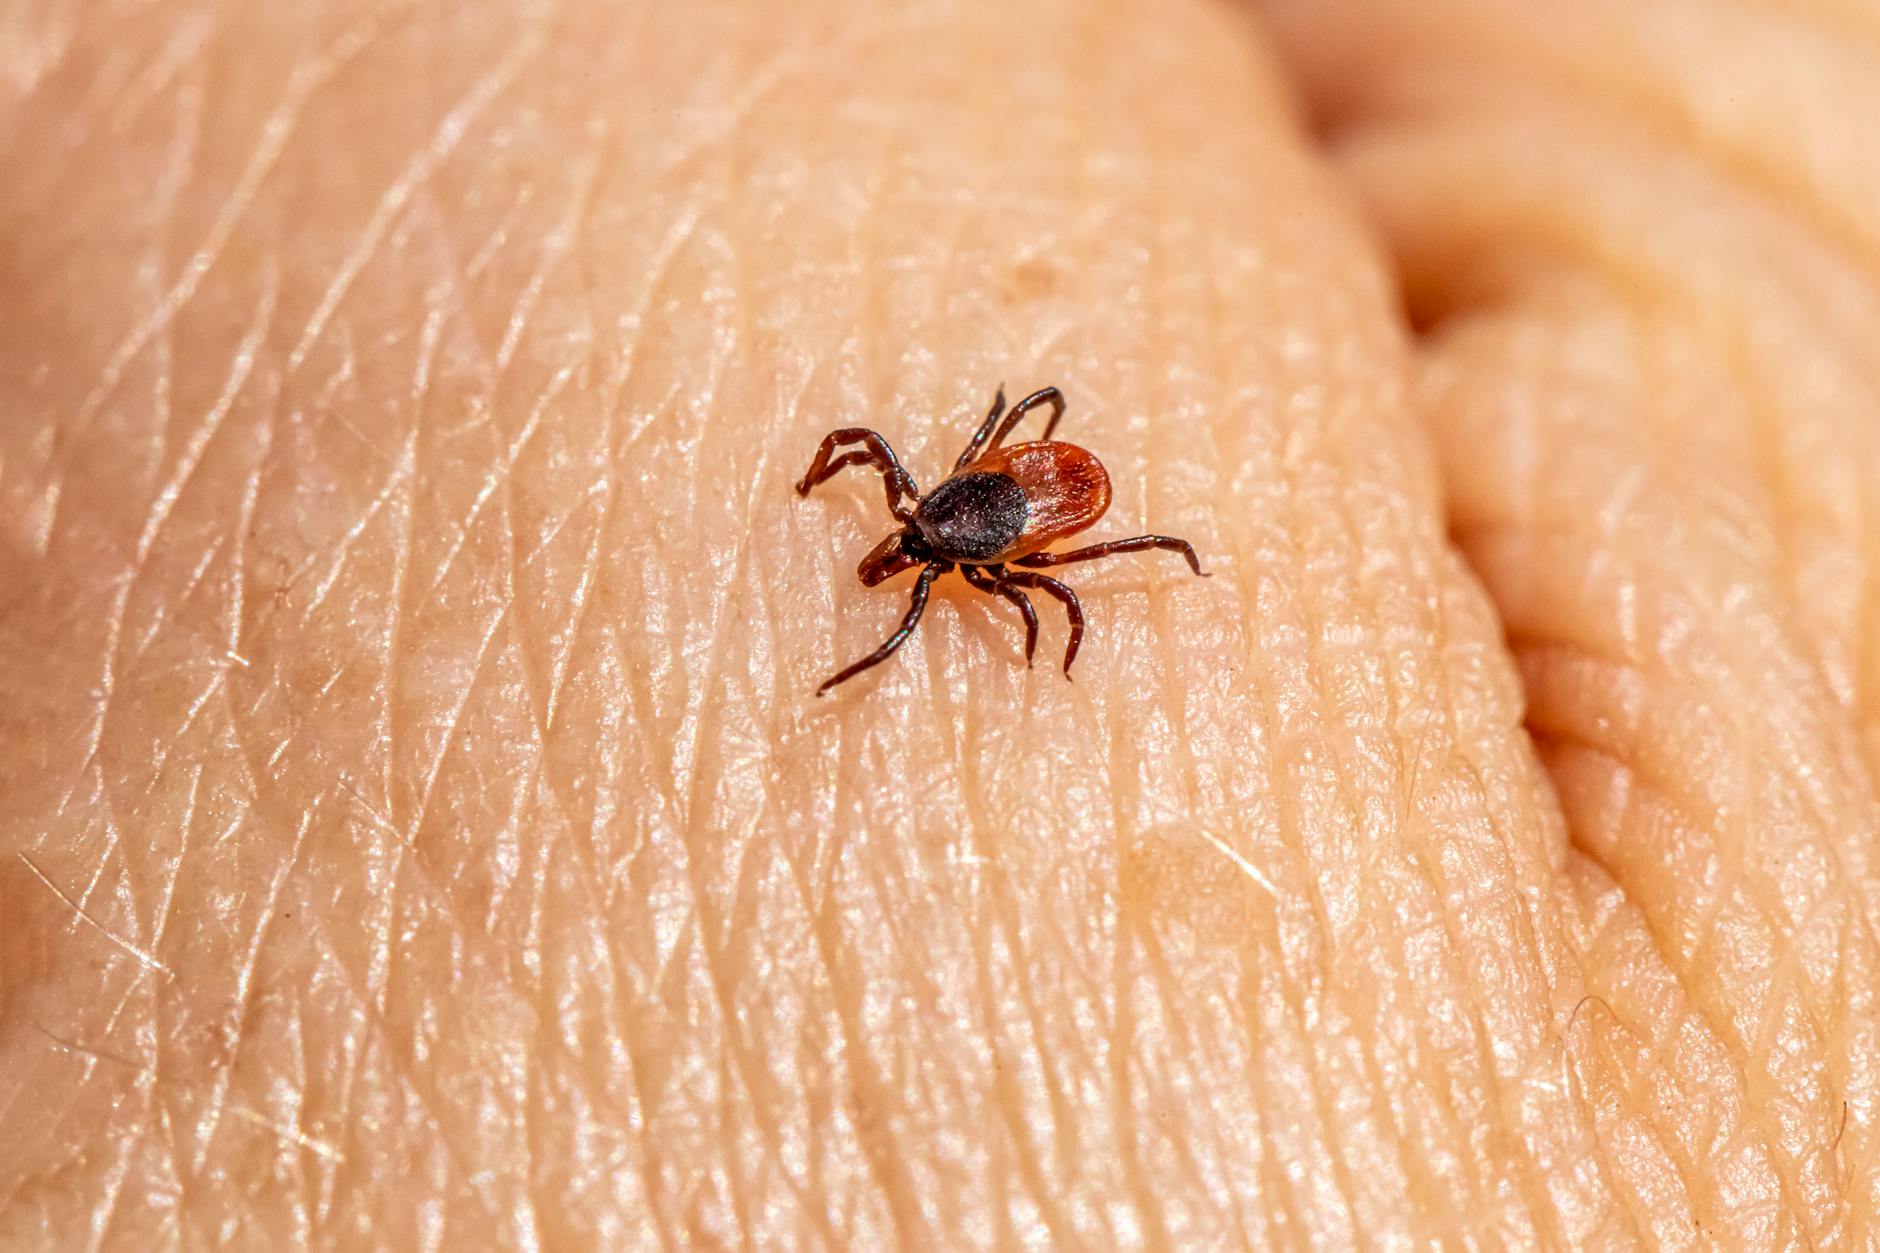 a tick on a person s skin